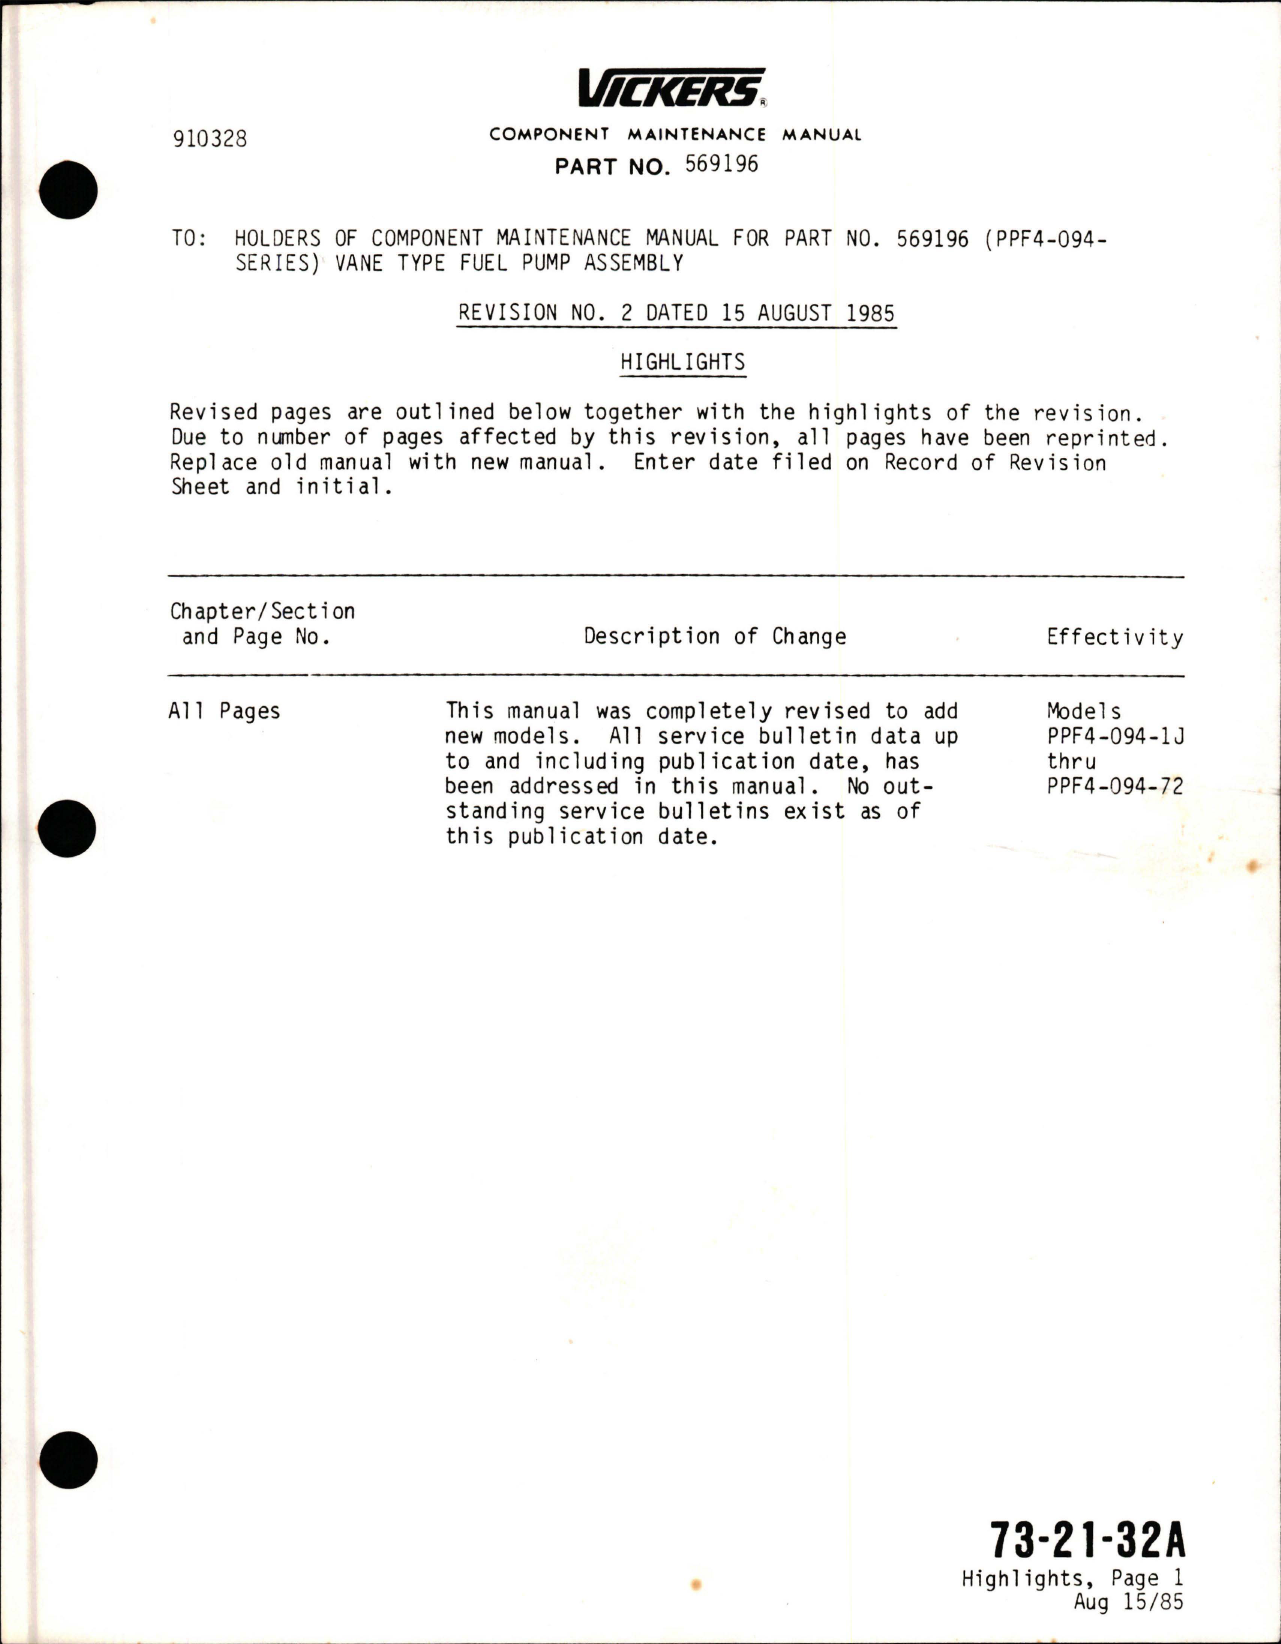 Sample page 1 from AirCorps Library document: Maintenance Manual - Revision to Vane Type Fuel Pump Assembly - Part 5659196